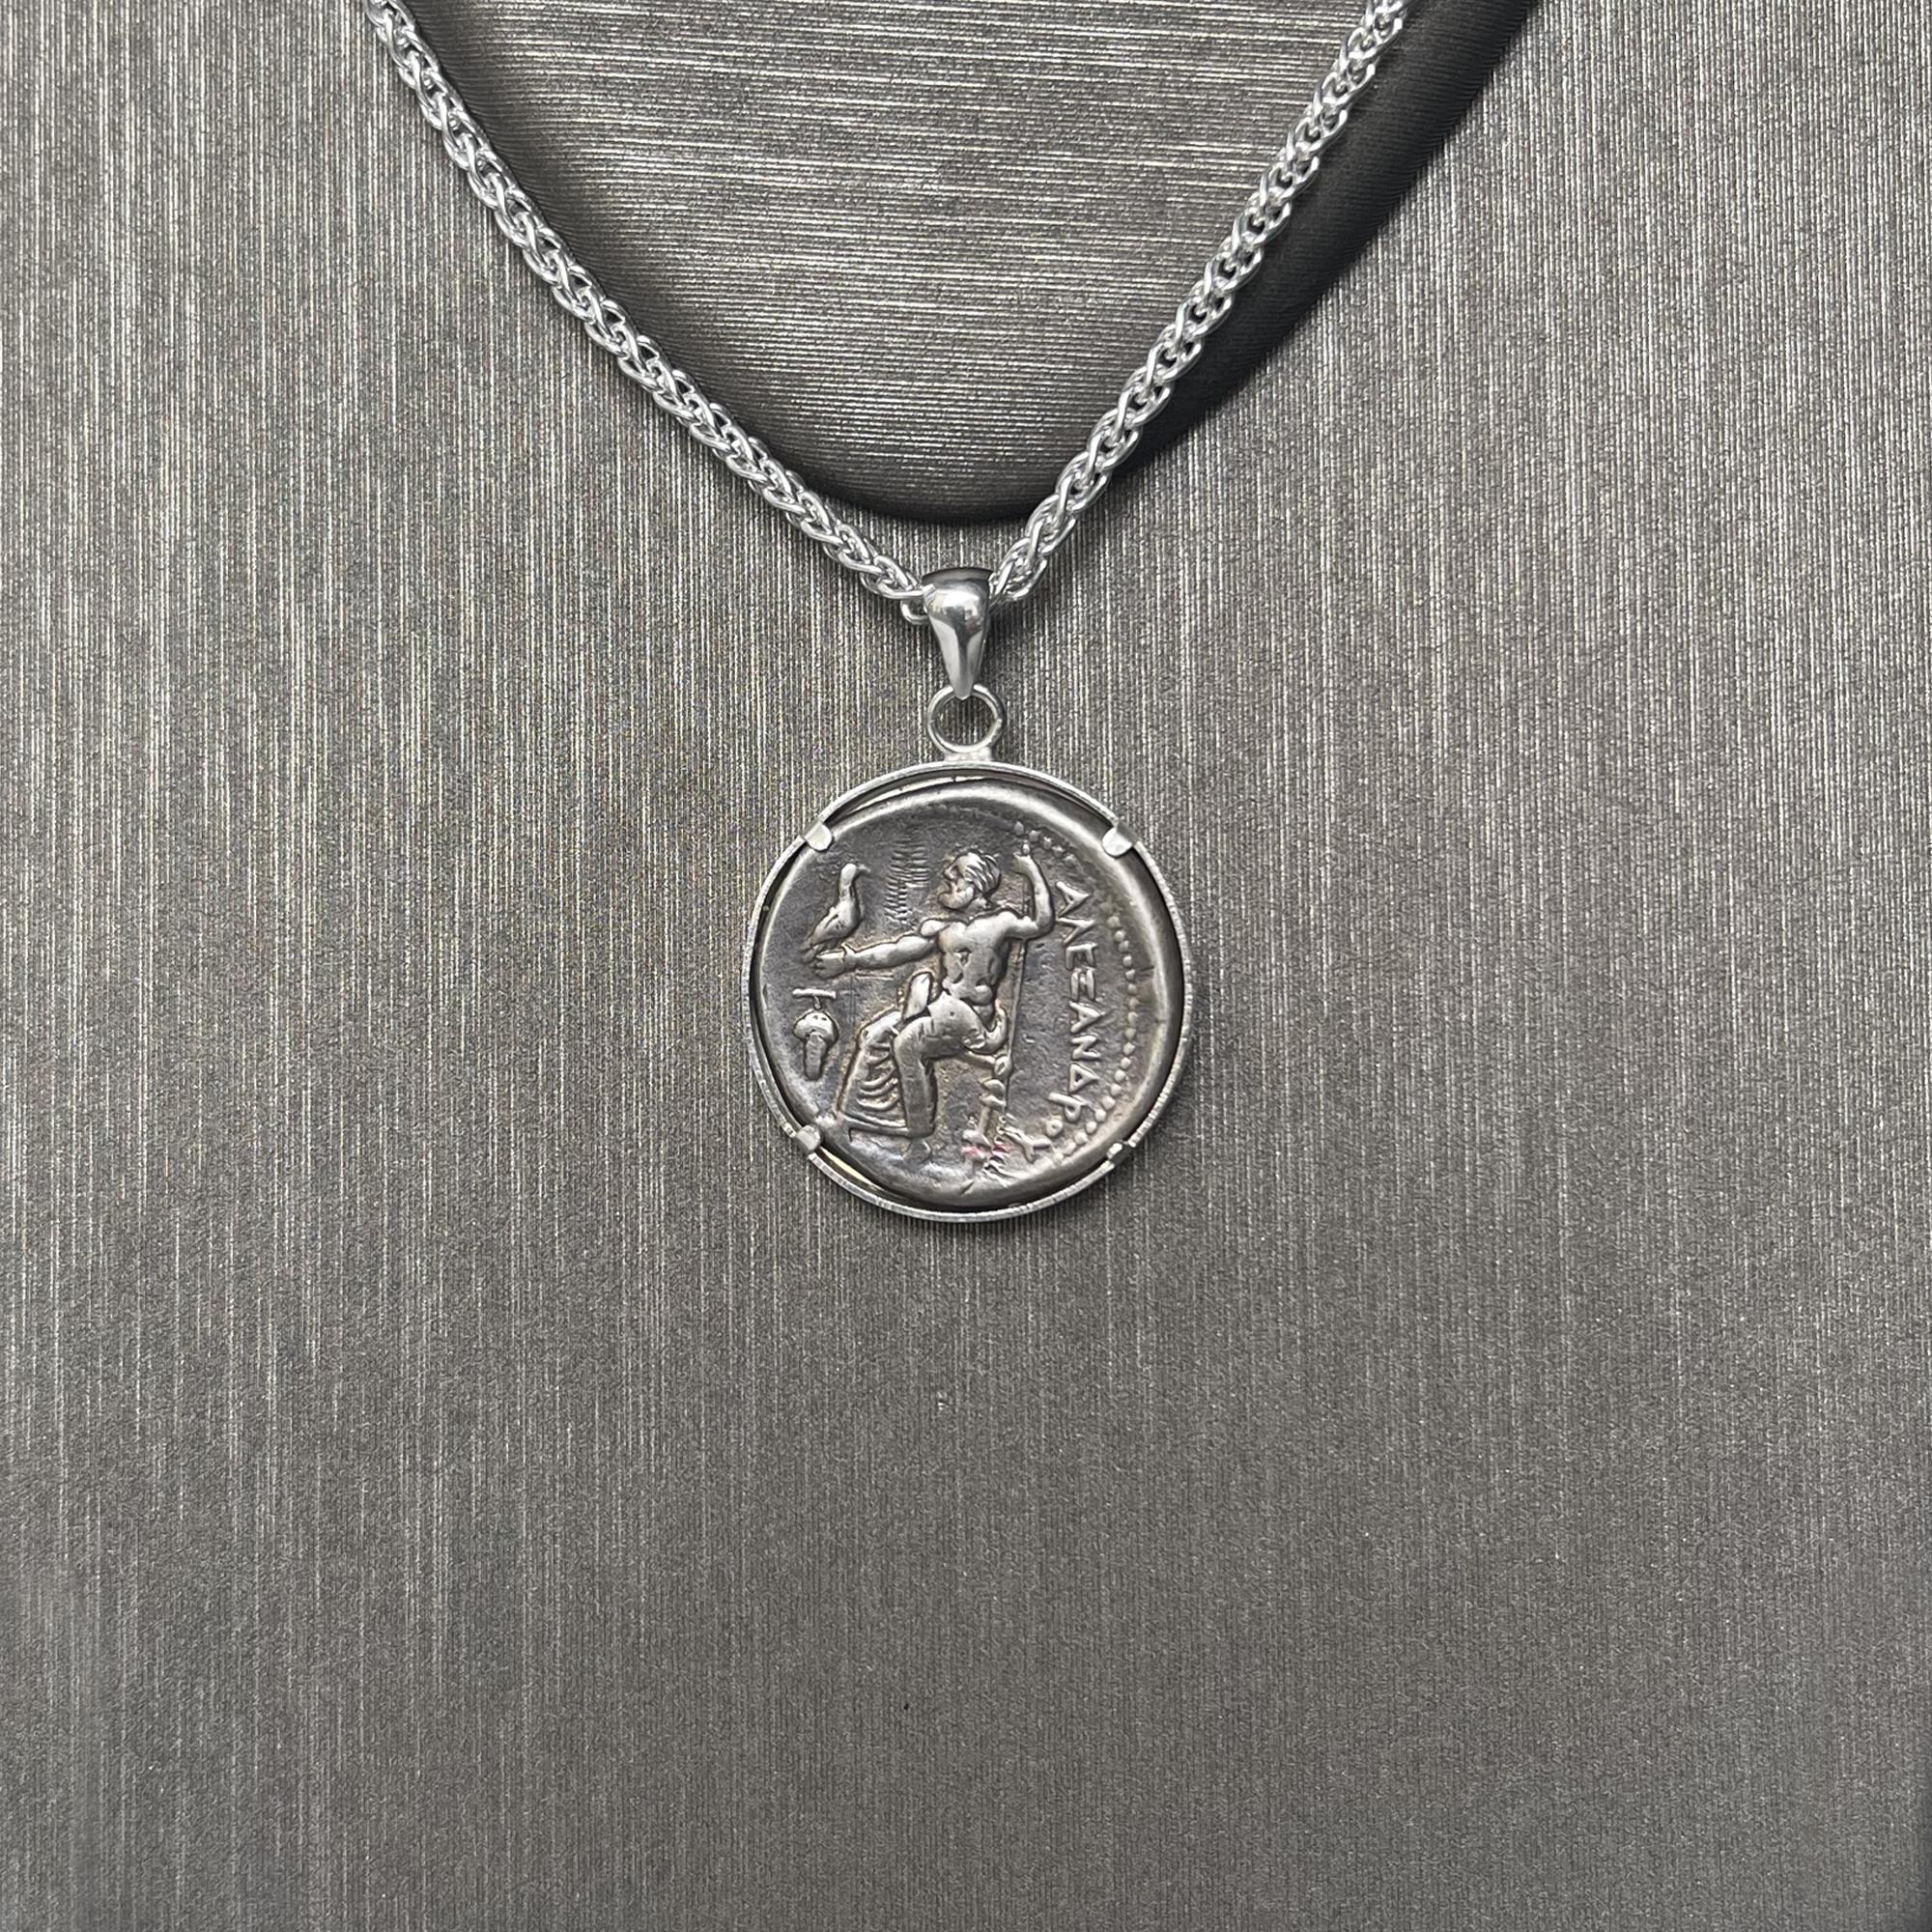 Classical Roman Greek Silver Coin 'IV Cent BC' Depicting Heracles Sterling Silver Pendant